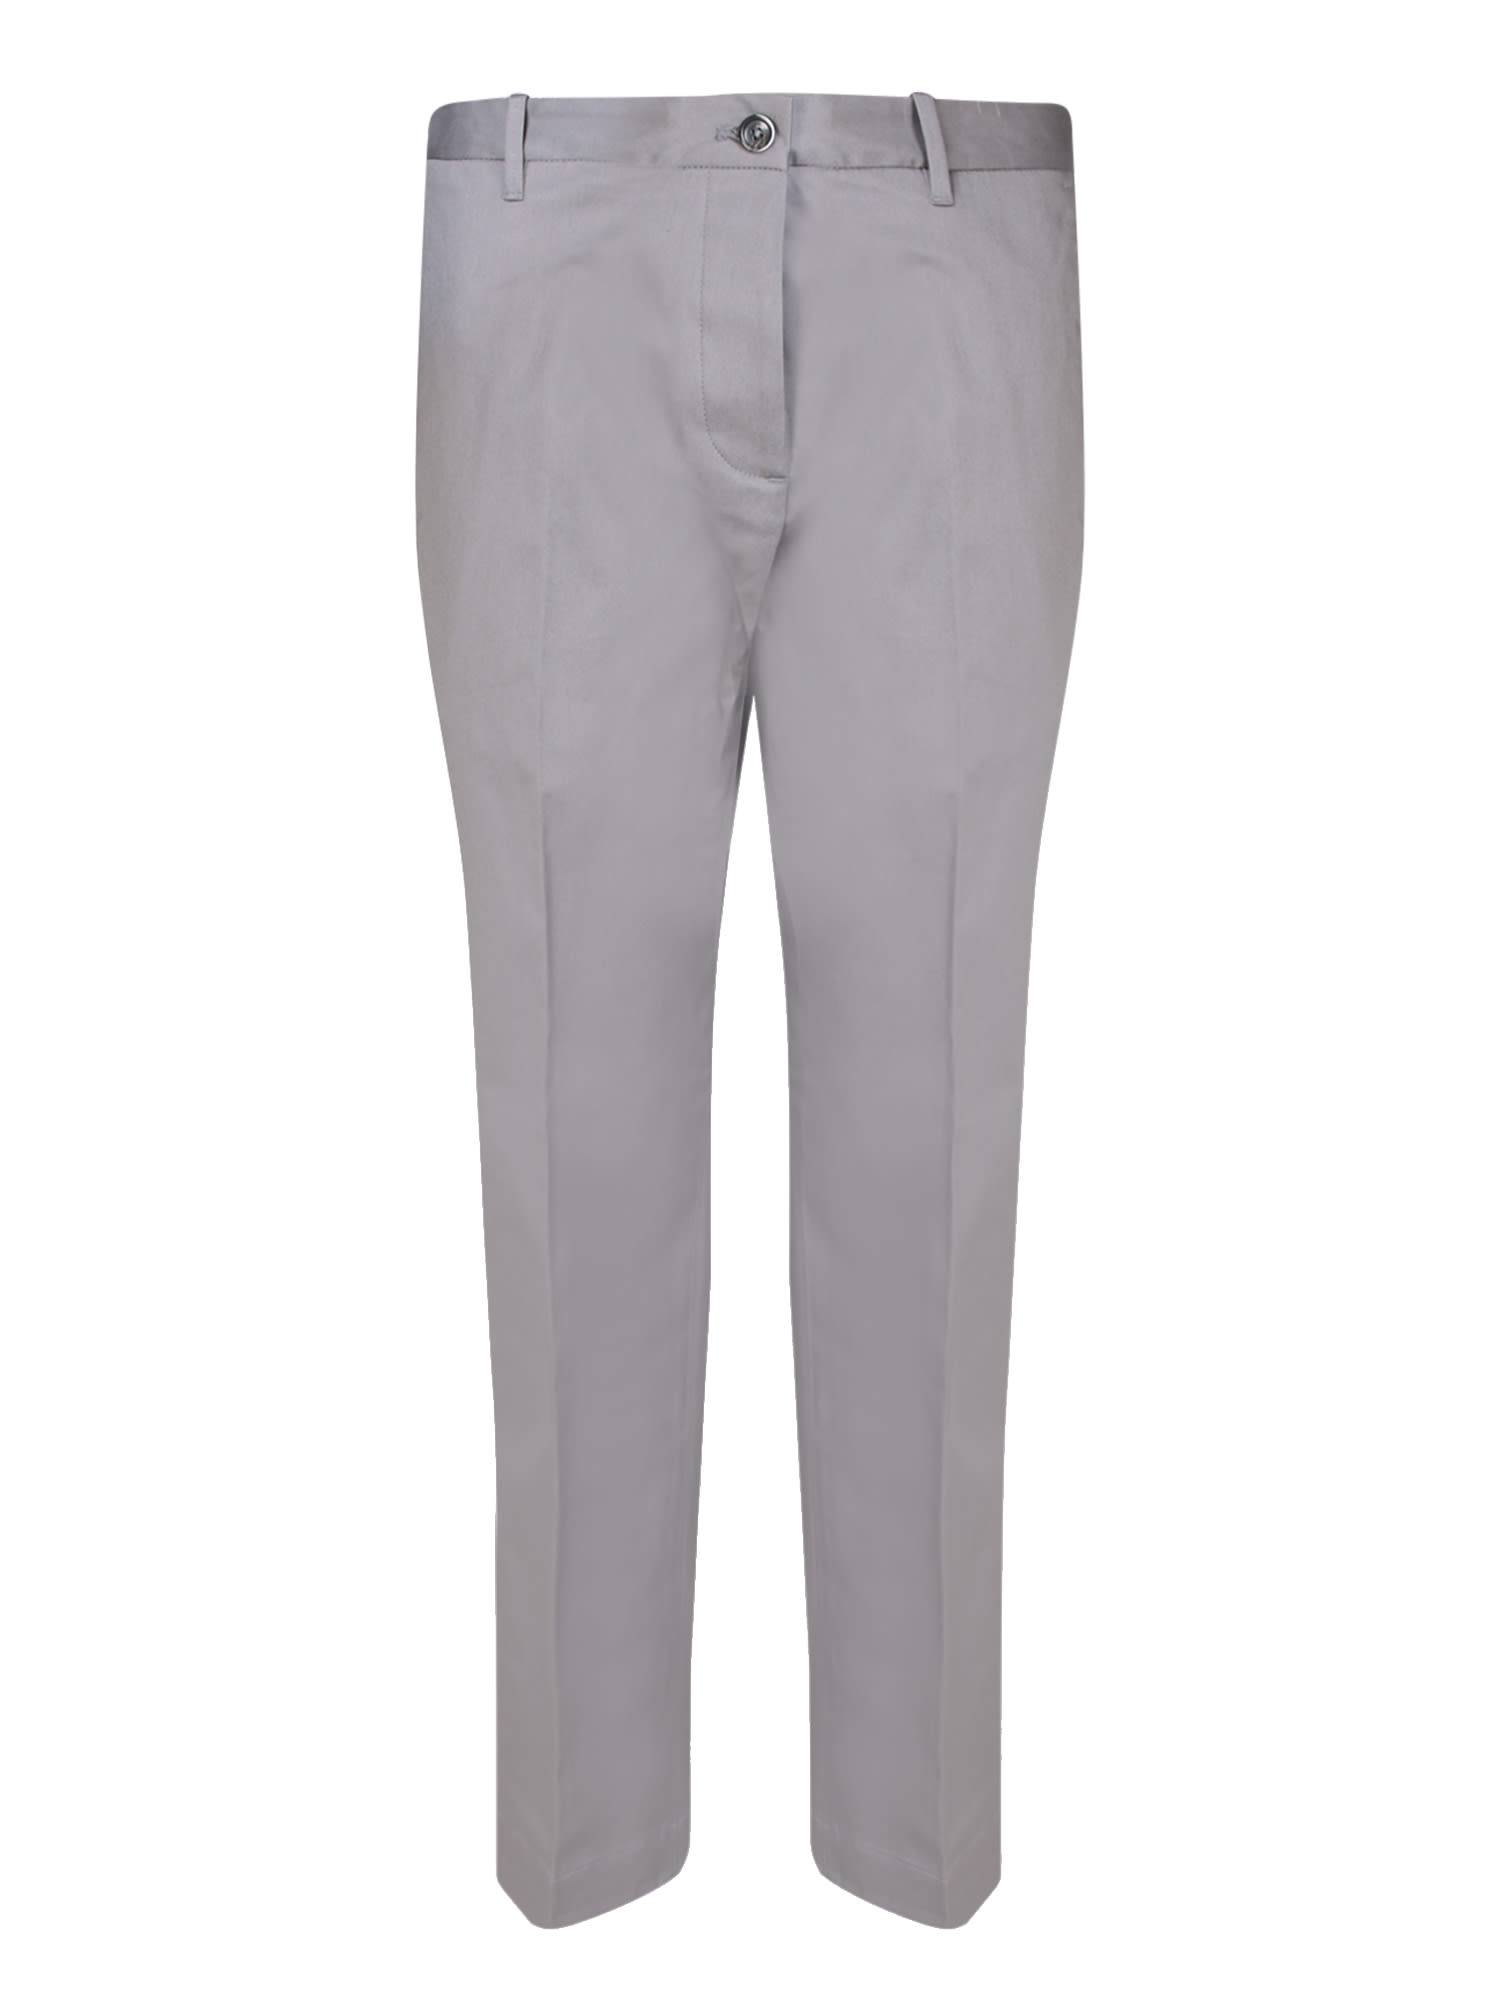 Smoky Grey Tailored Trousers